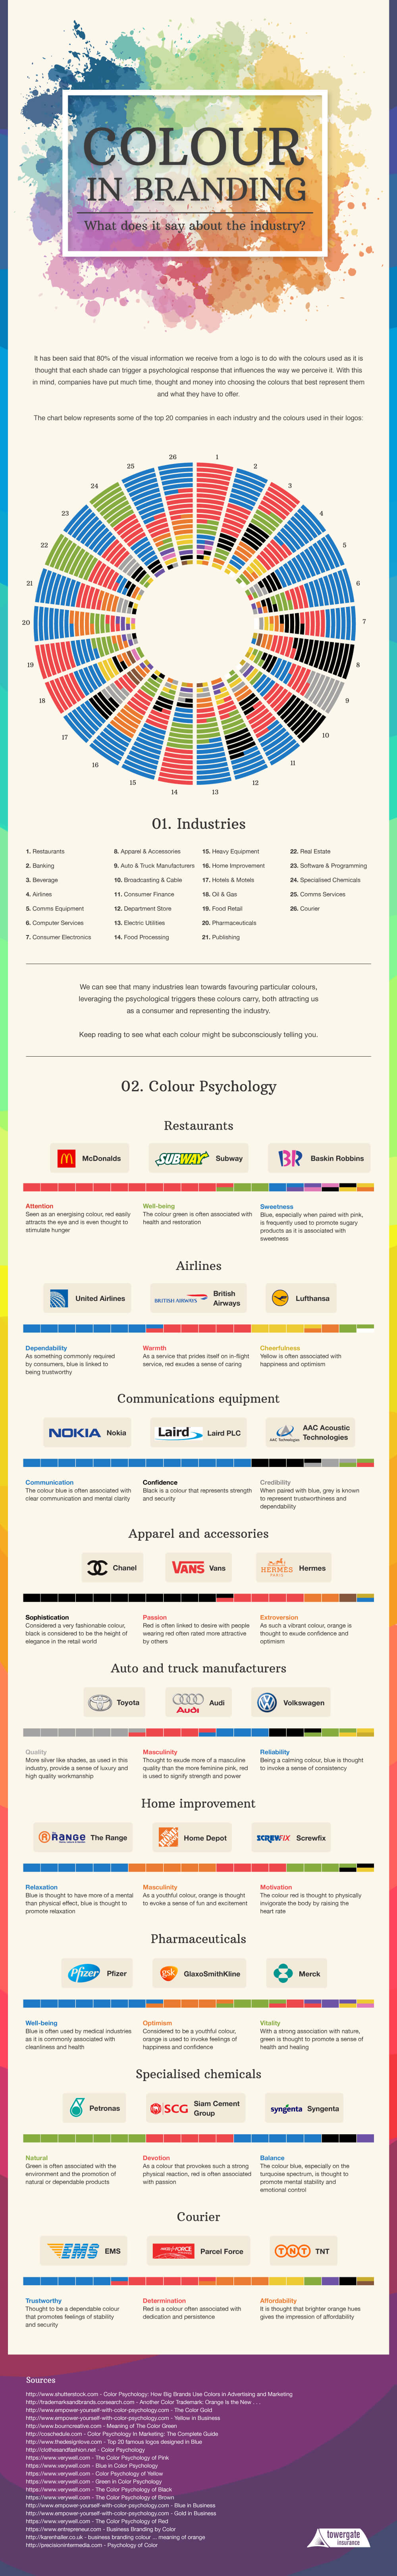 Colour In Branding: What Does It Say About Each Industry?